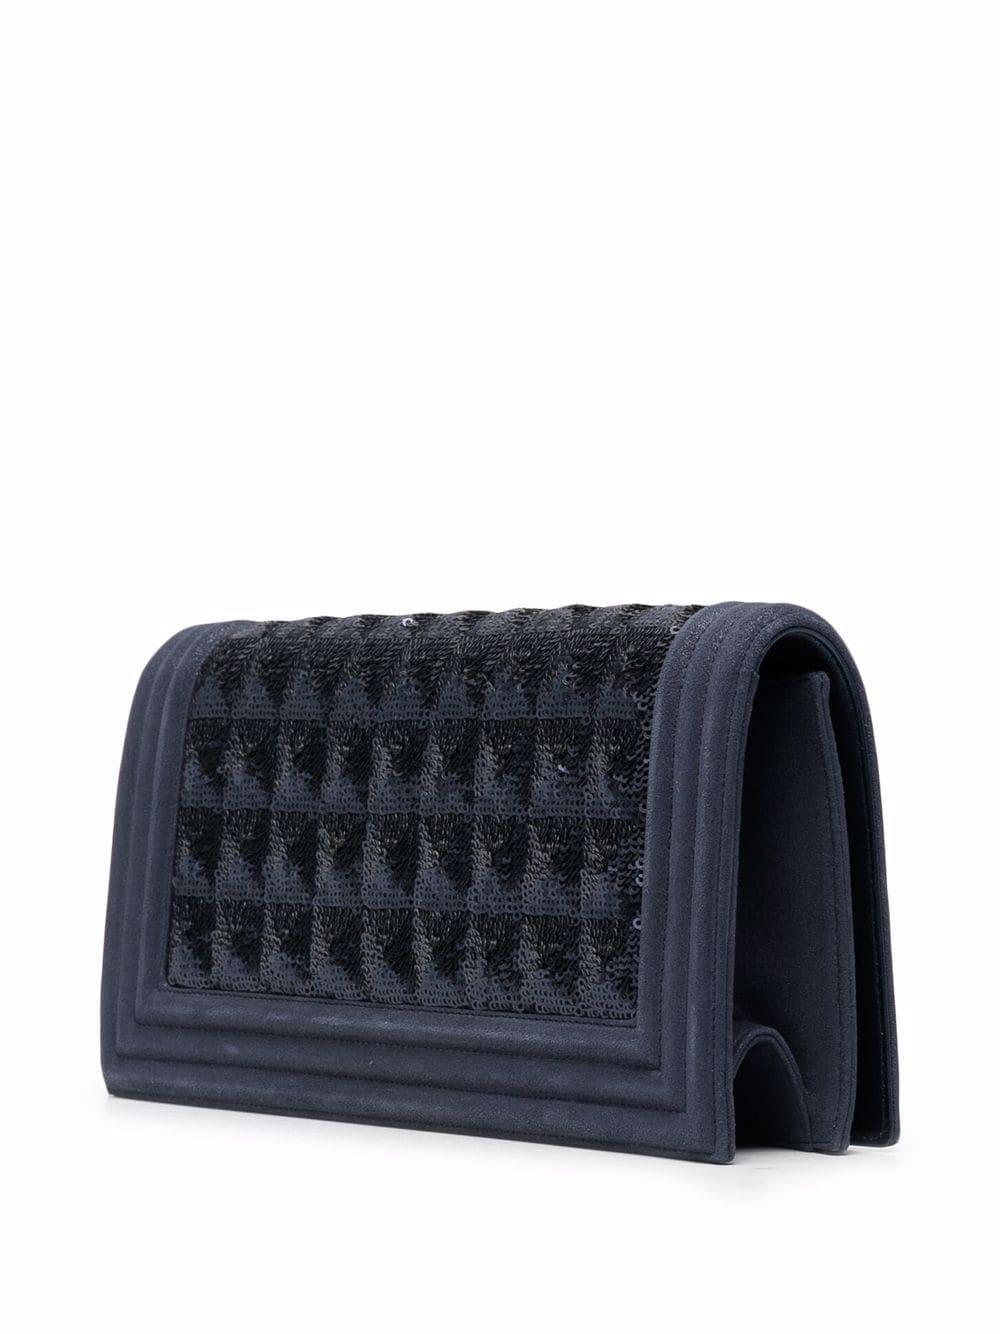 Gorgeous and Rare Chanel Boy Clutch made of Navy Suede and sequin. Gun Hardware.

Dimensions: 26 x 12.5 x 6 cm

Signature: Chanel Made in Italy, serial number, dated from 2013.

Excellent condition (hardly used).